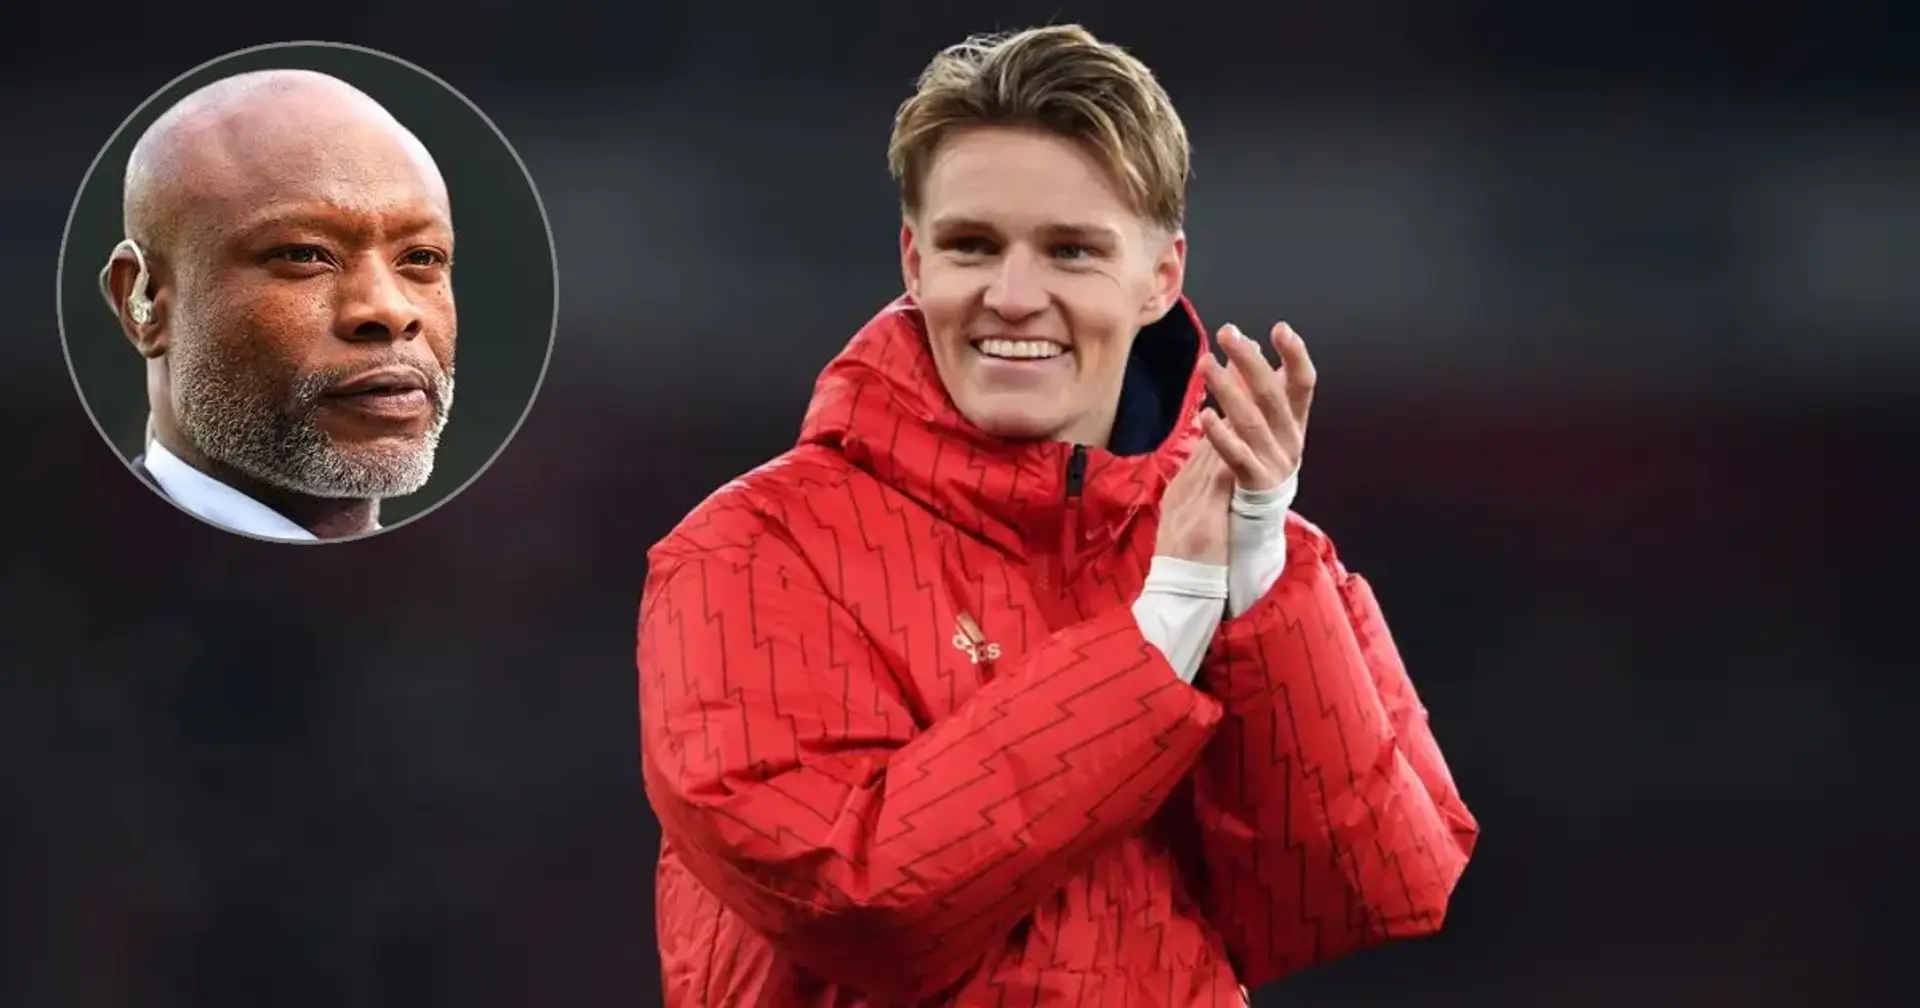 William Gallas reveals what Martin Odegaard does he hasn't seen before